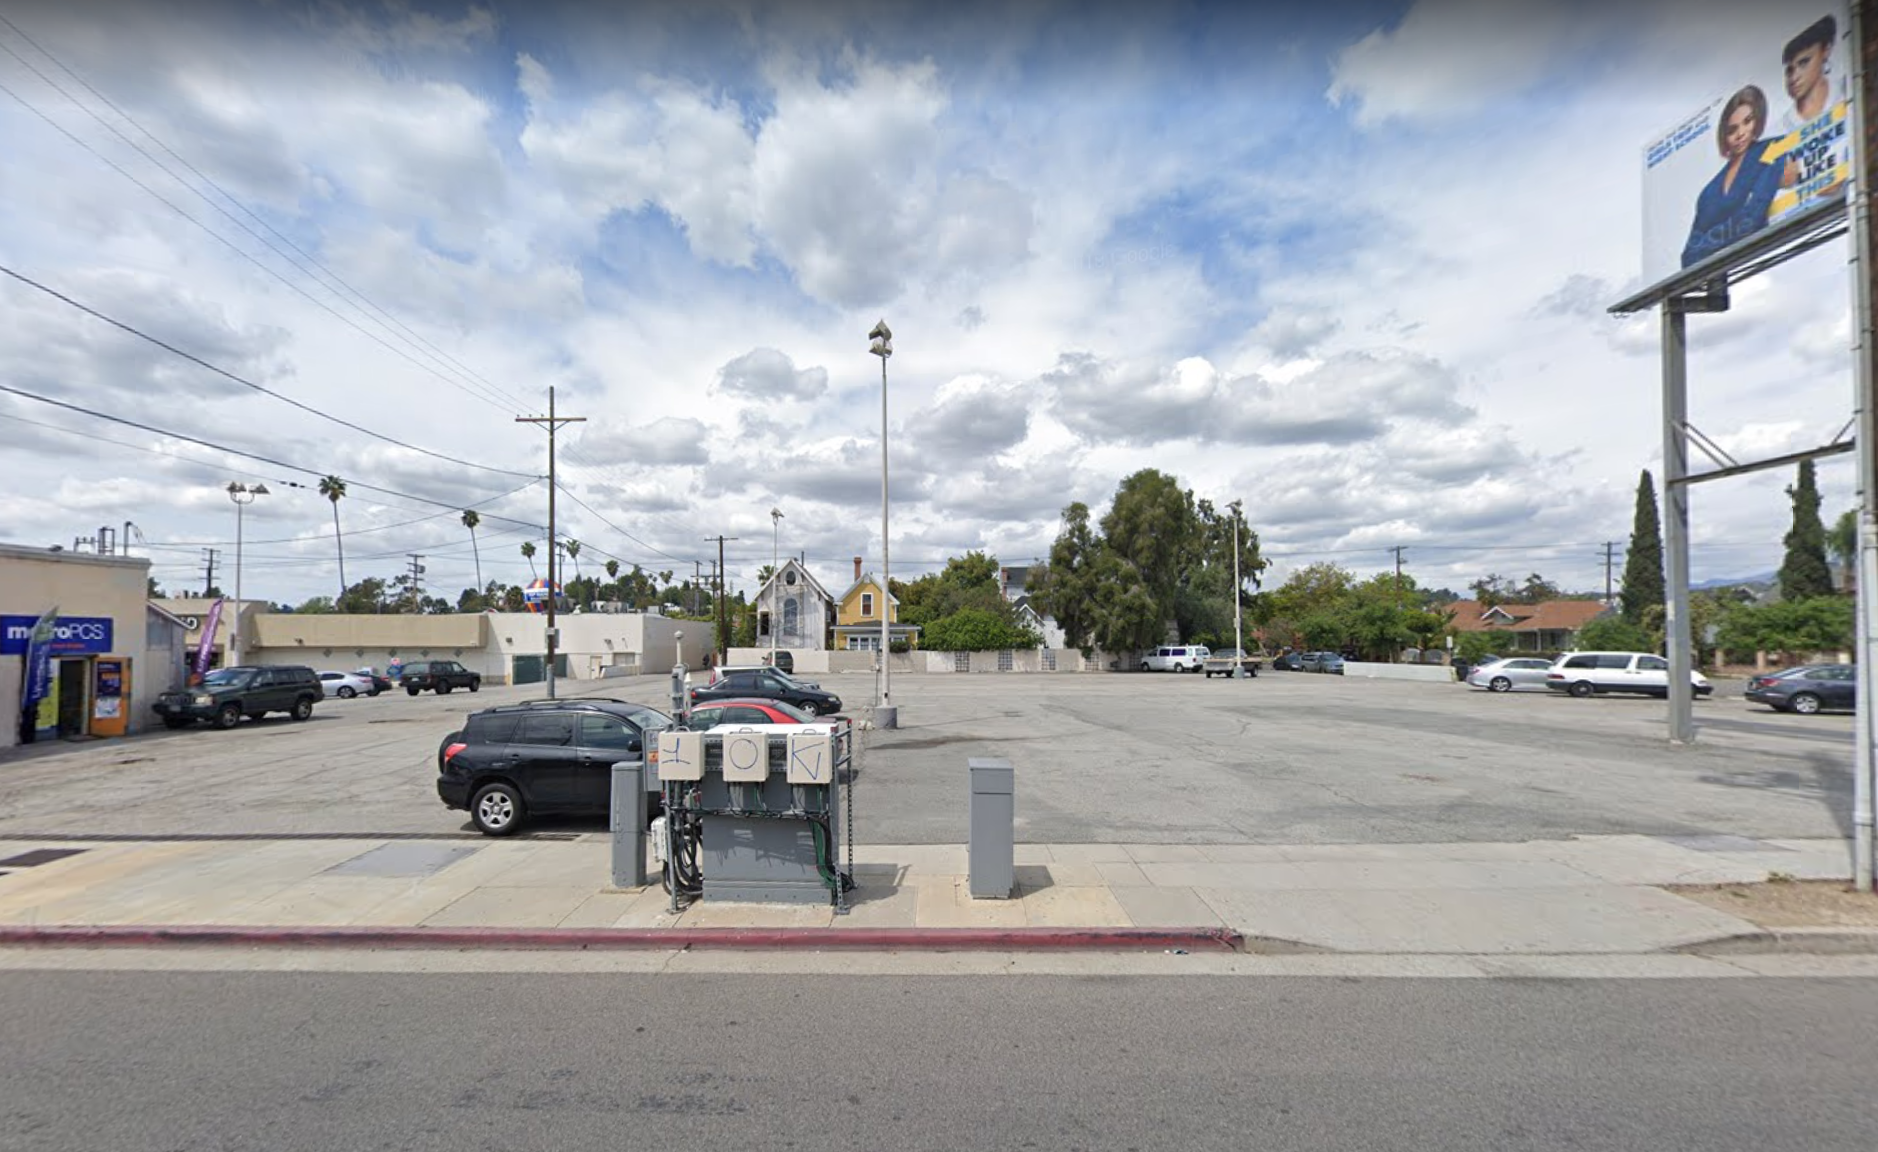 Highland Park Neighborhood To Review 33-Unit Mixed-Use Project | What ...